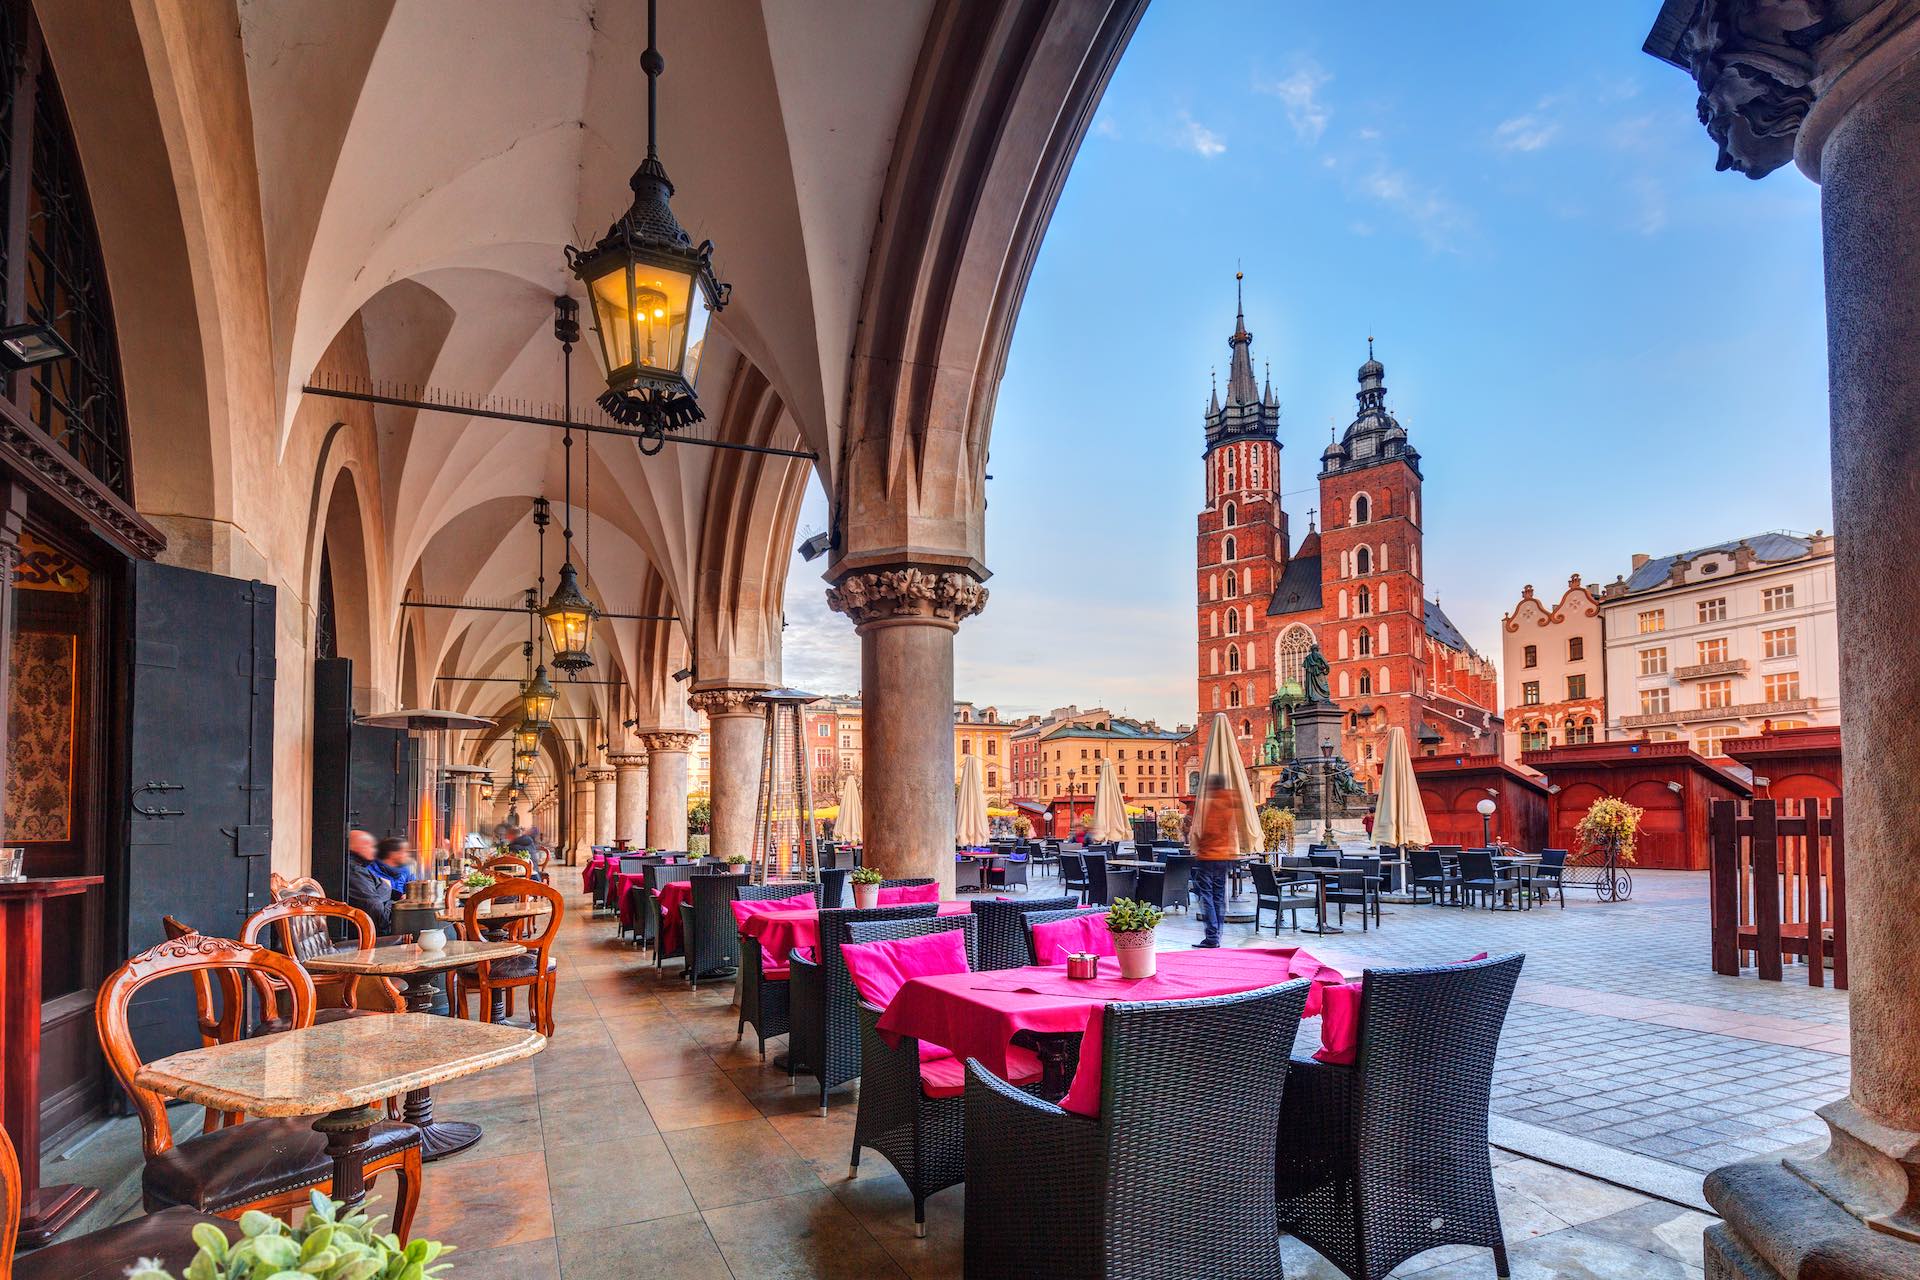 What are the top 5 must-visit cities in Poland?